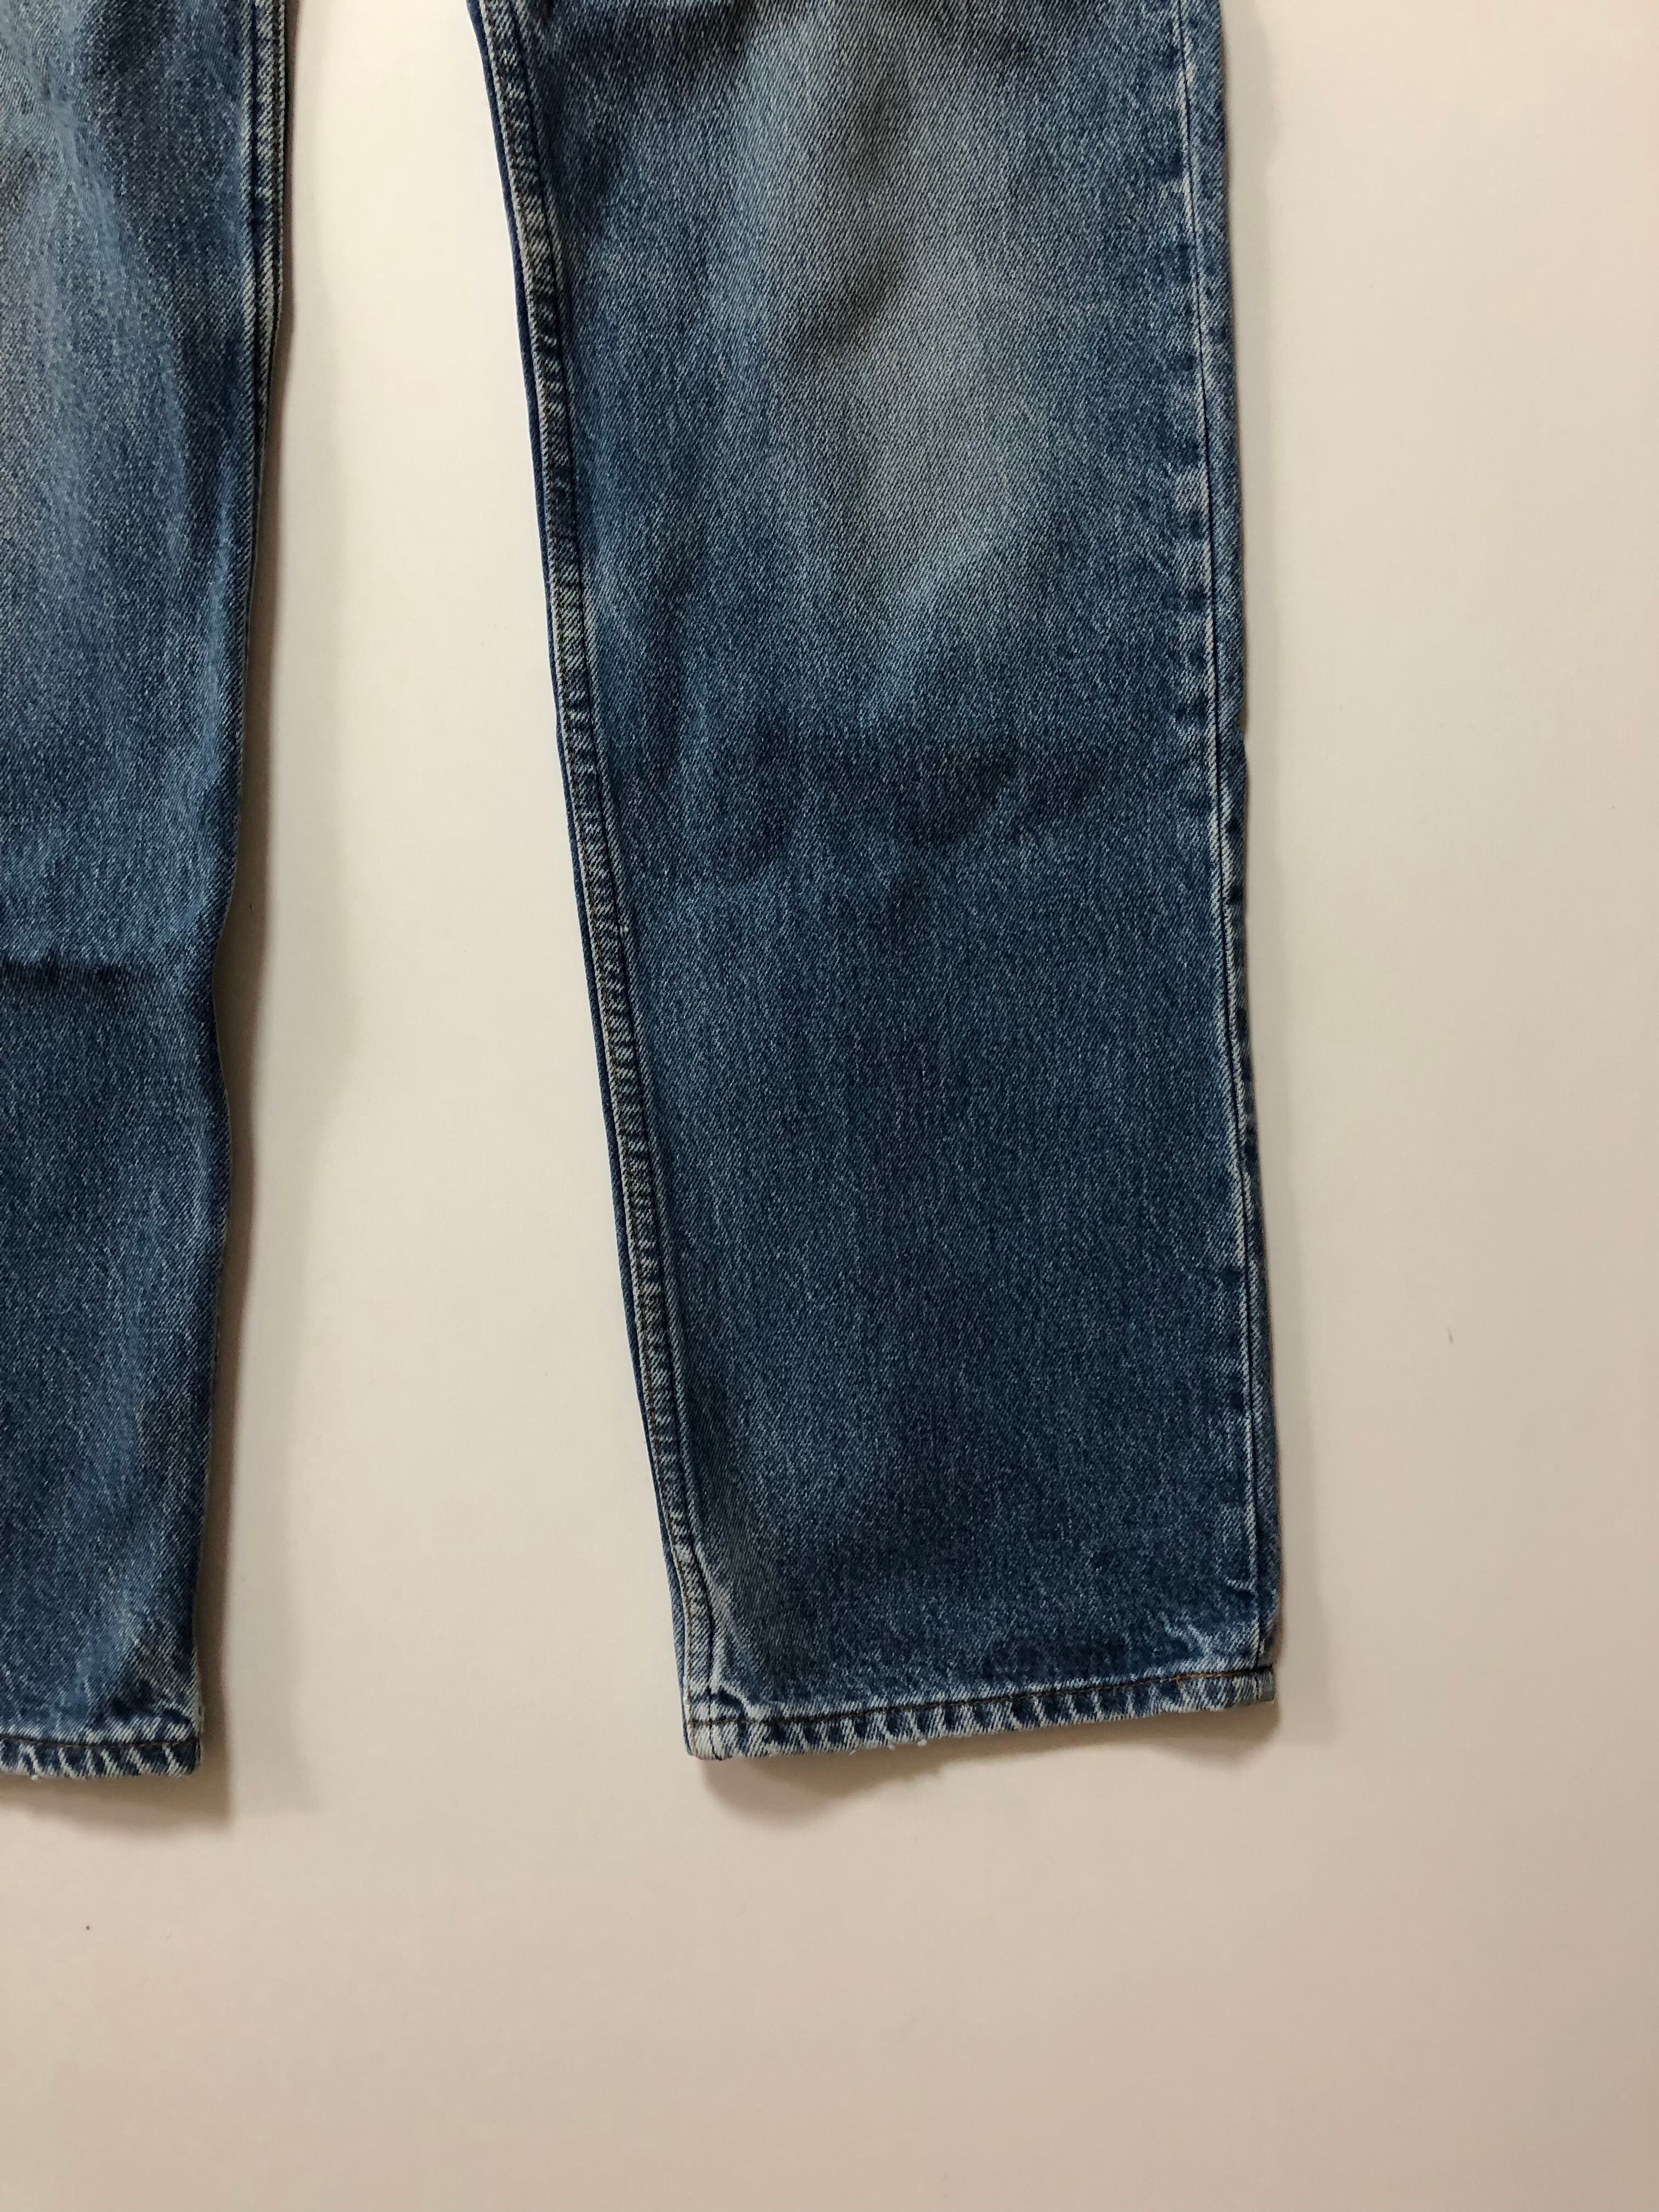 80's W30 LEVI'S 701 リーバイス 440 | ＳＥＣＯＮＤ HAND RED